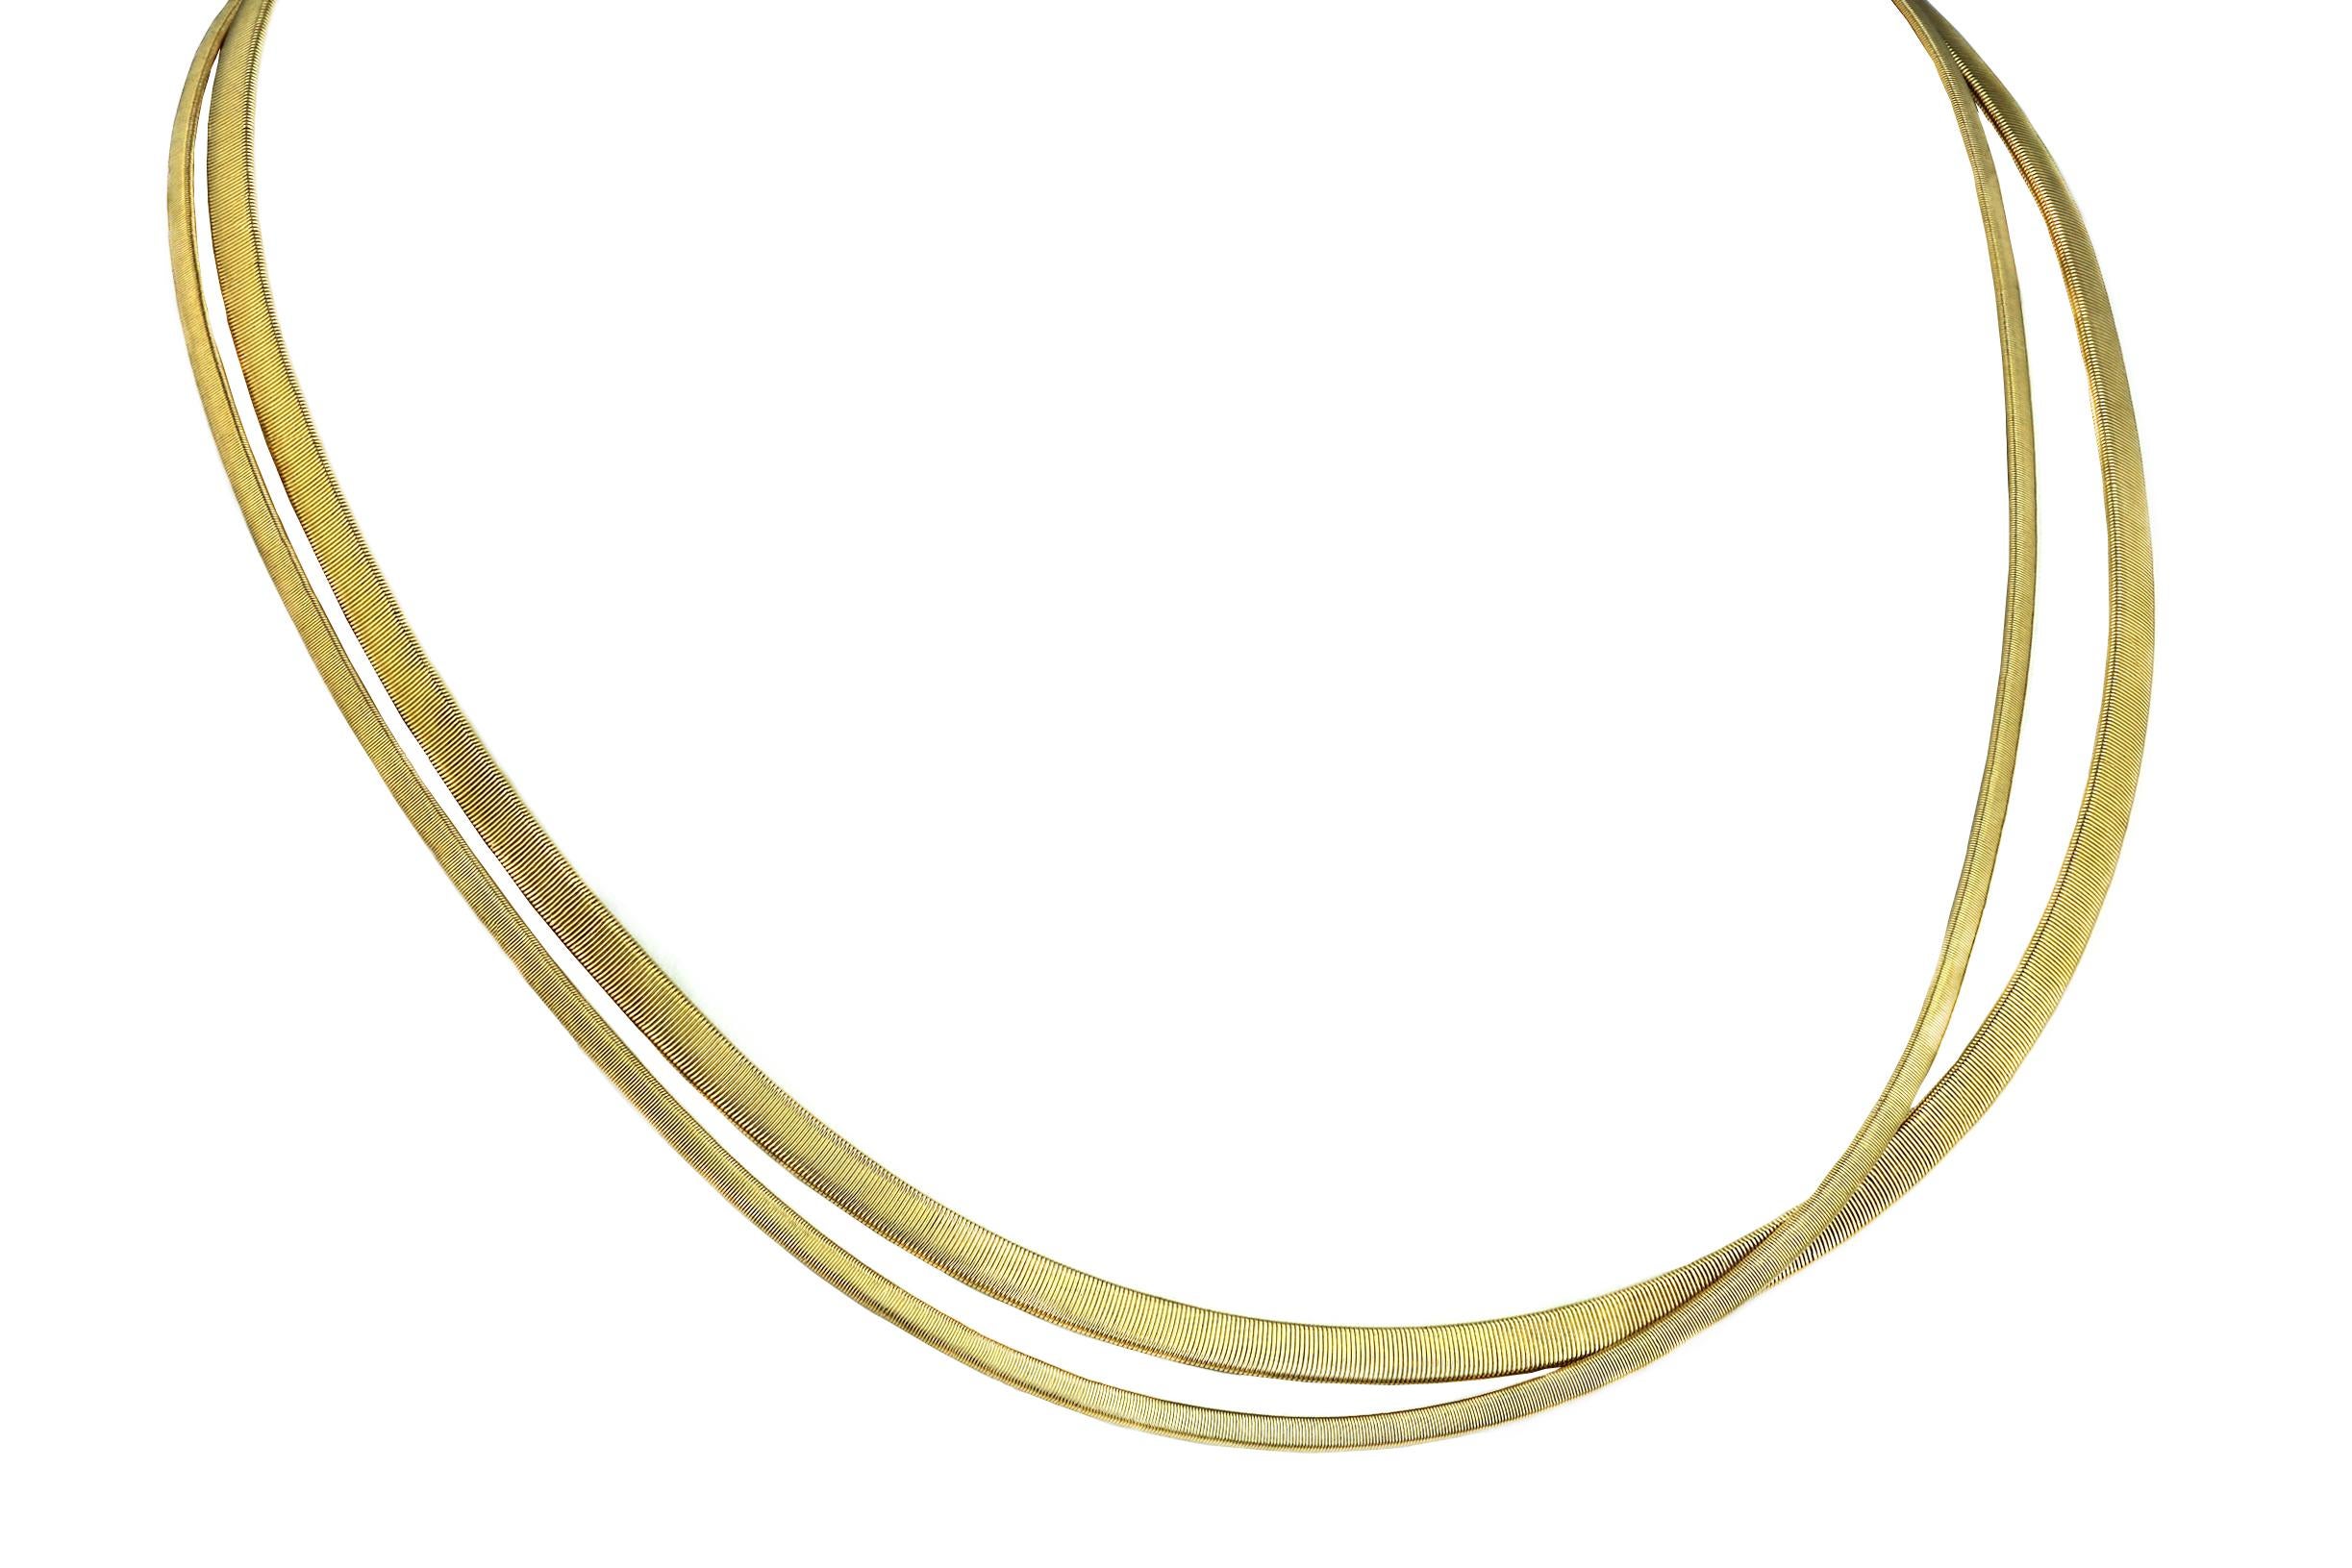 Modern Marco Bicego Double Strand Masai Necklace in 18 Karat Yellow Gold